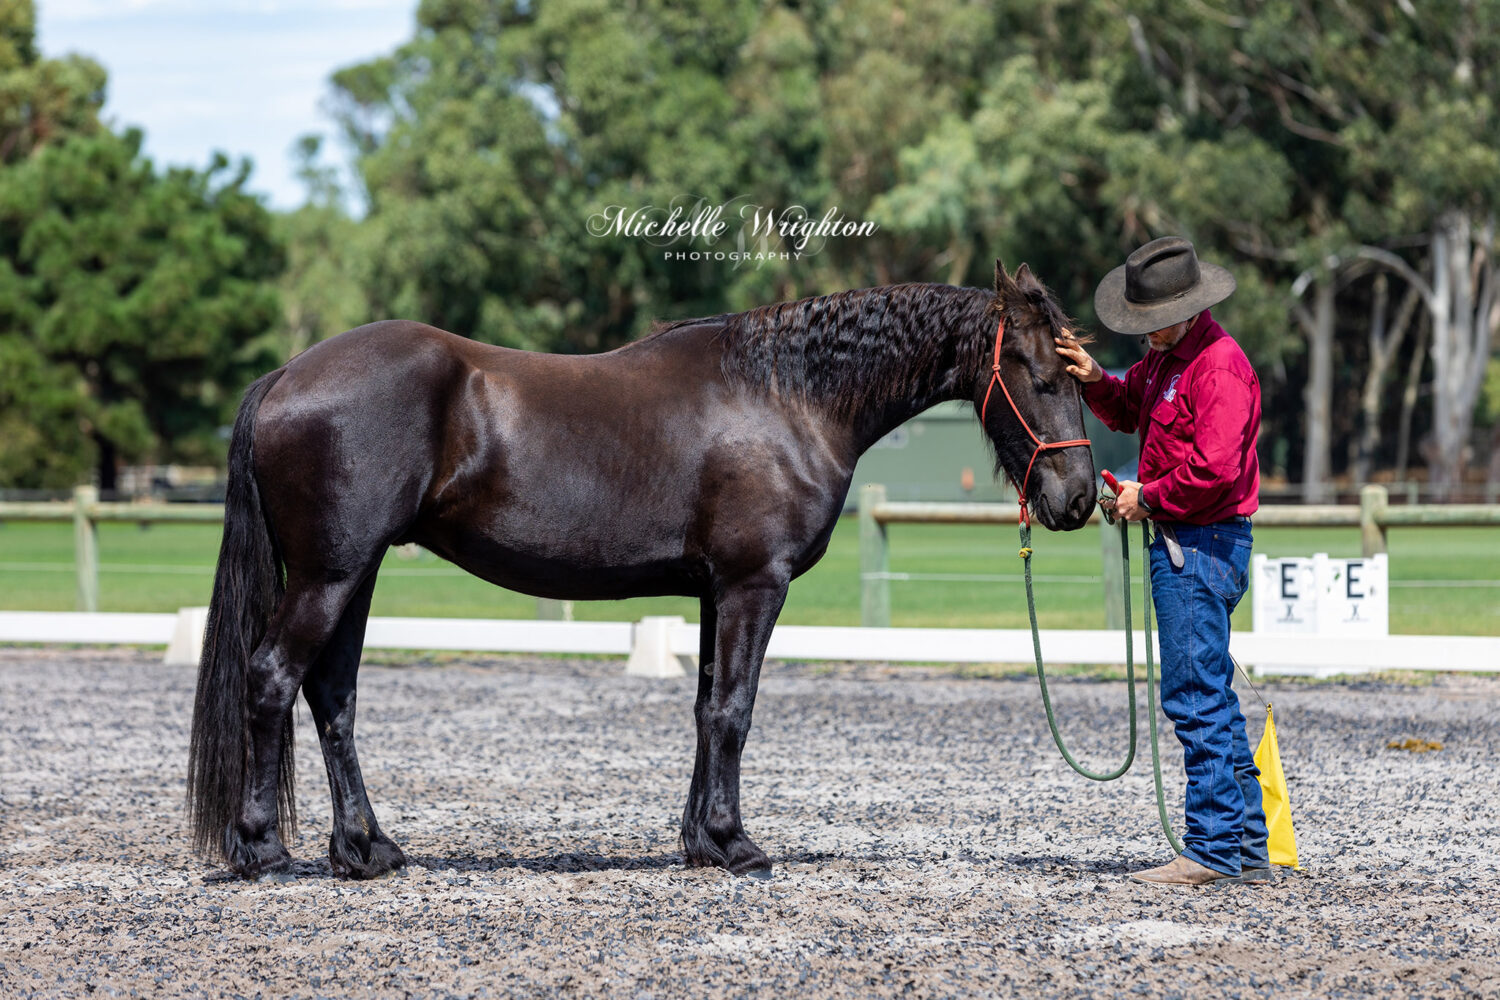 AMT Equestrian services horsemanship display 2019 Western Australia Friesian horse Keuring young horse training display